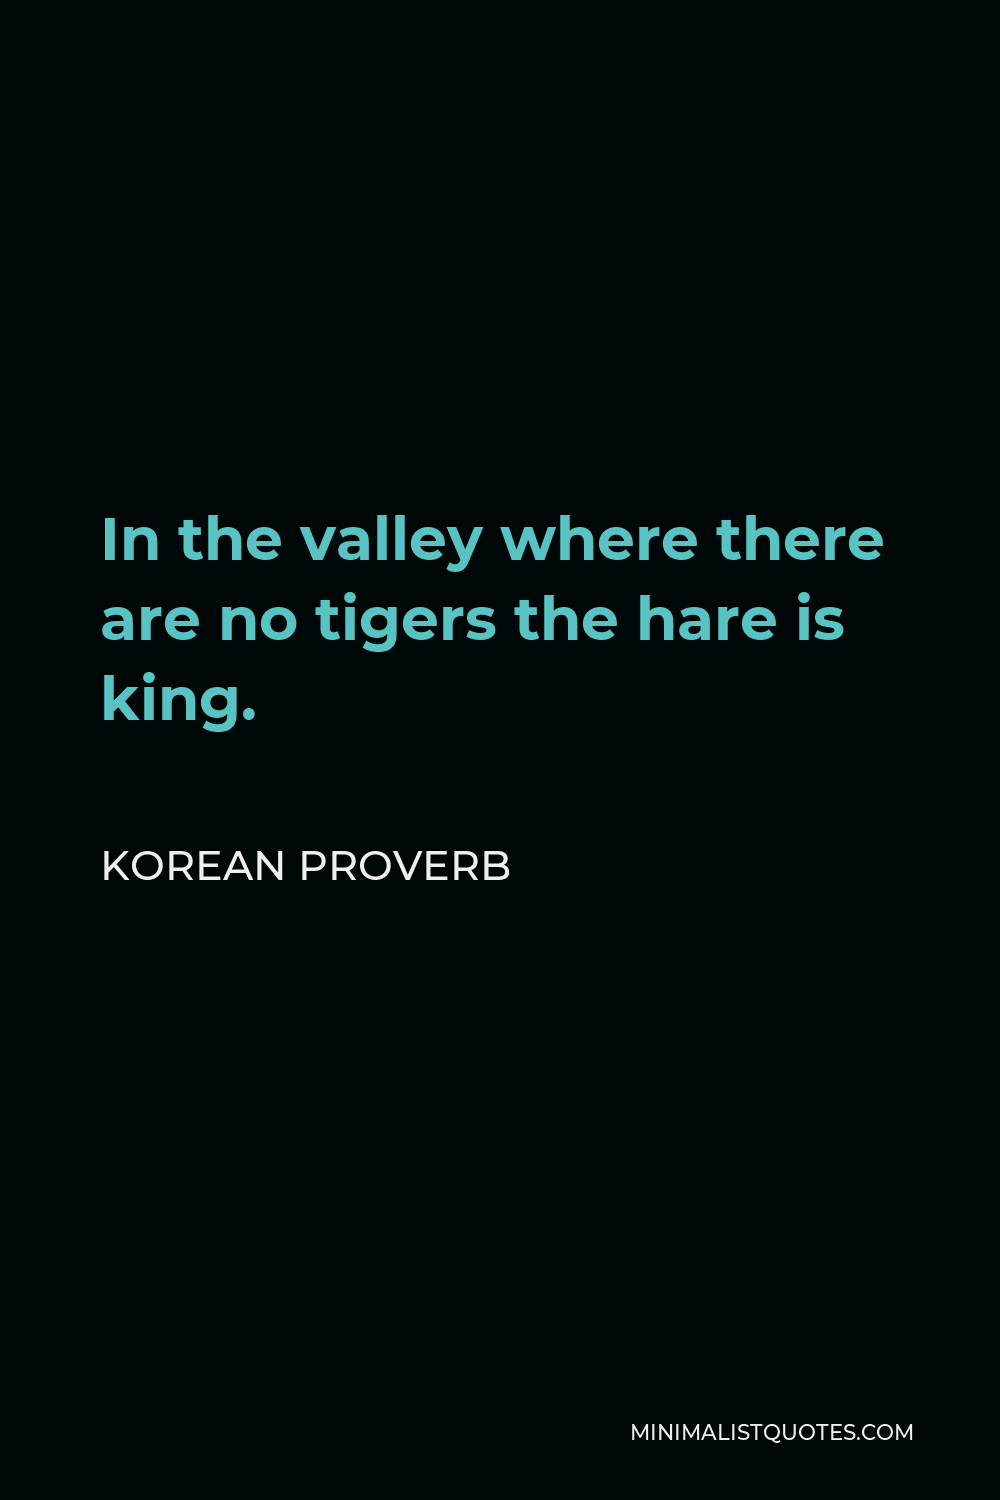 Korean Proverb Quote - In the valley where there are no tigers the hare is king.